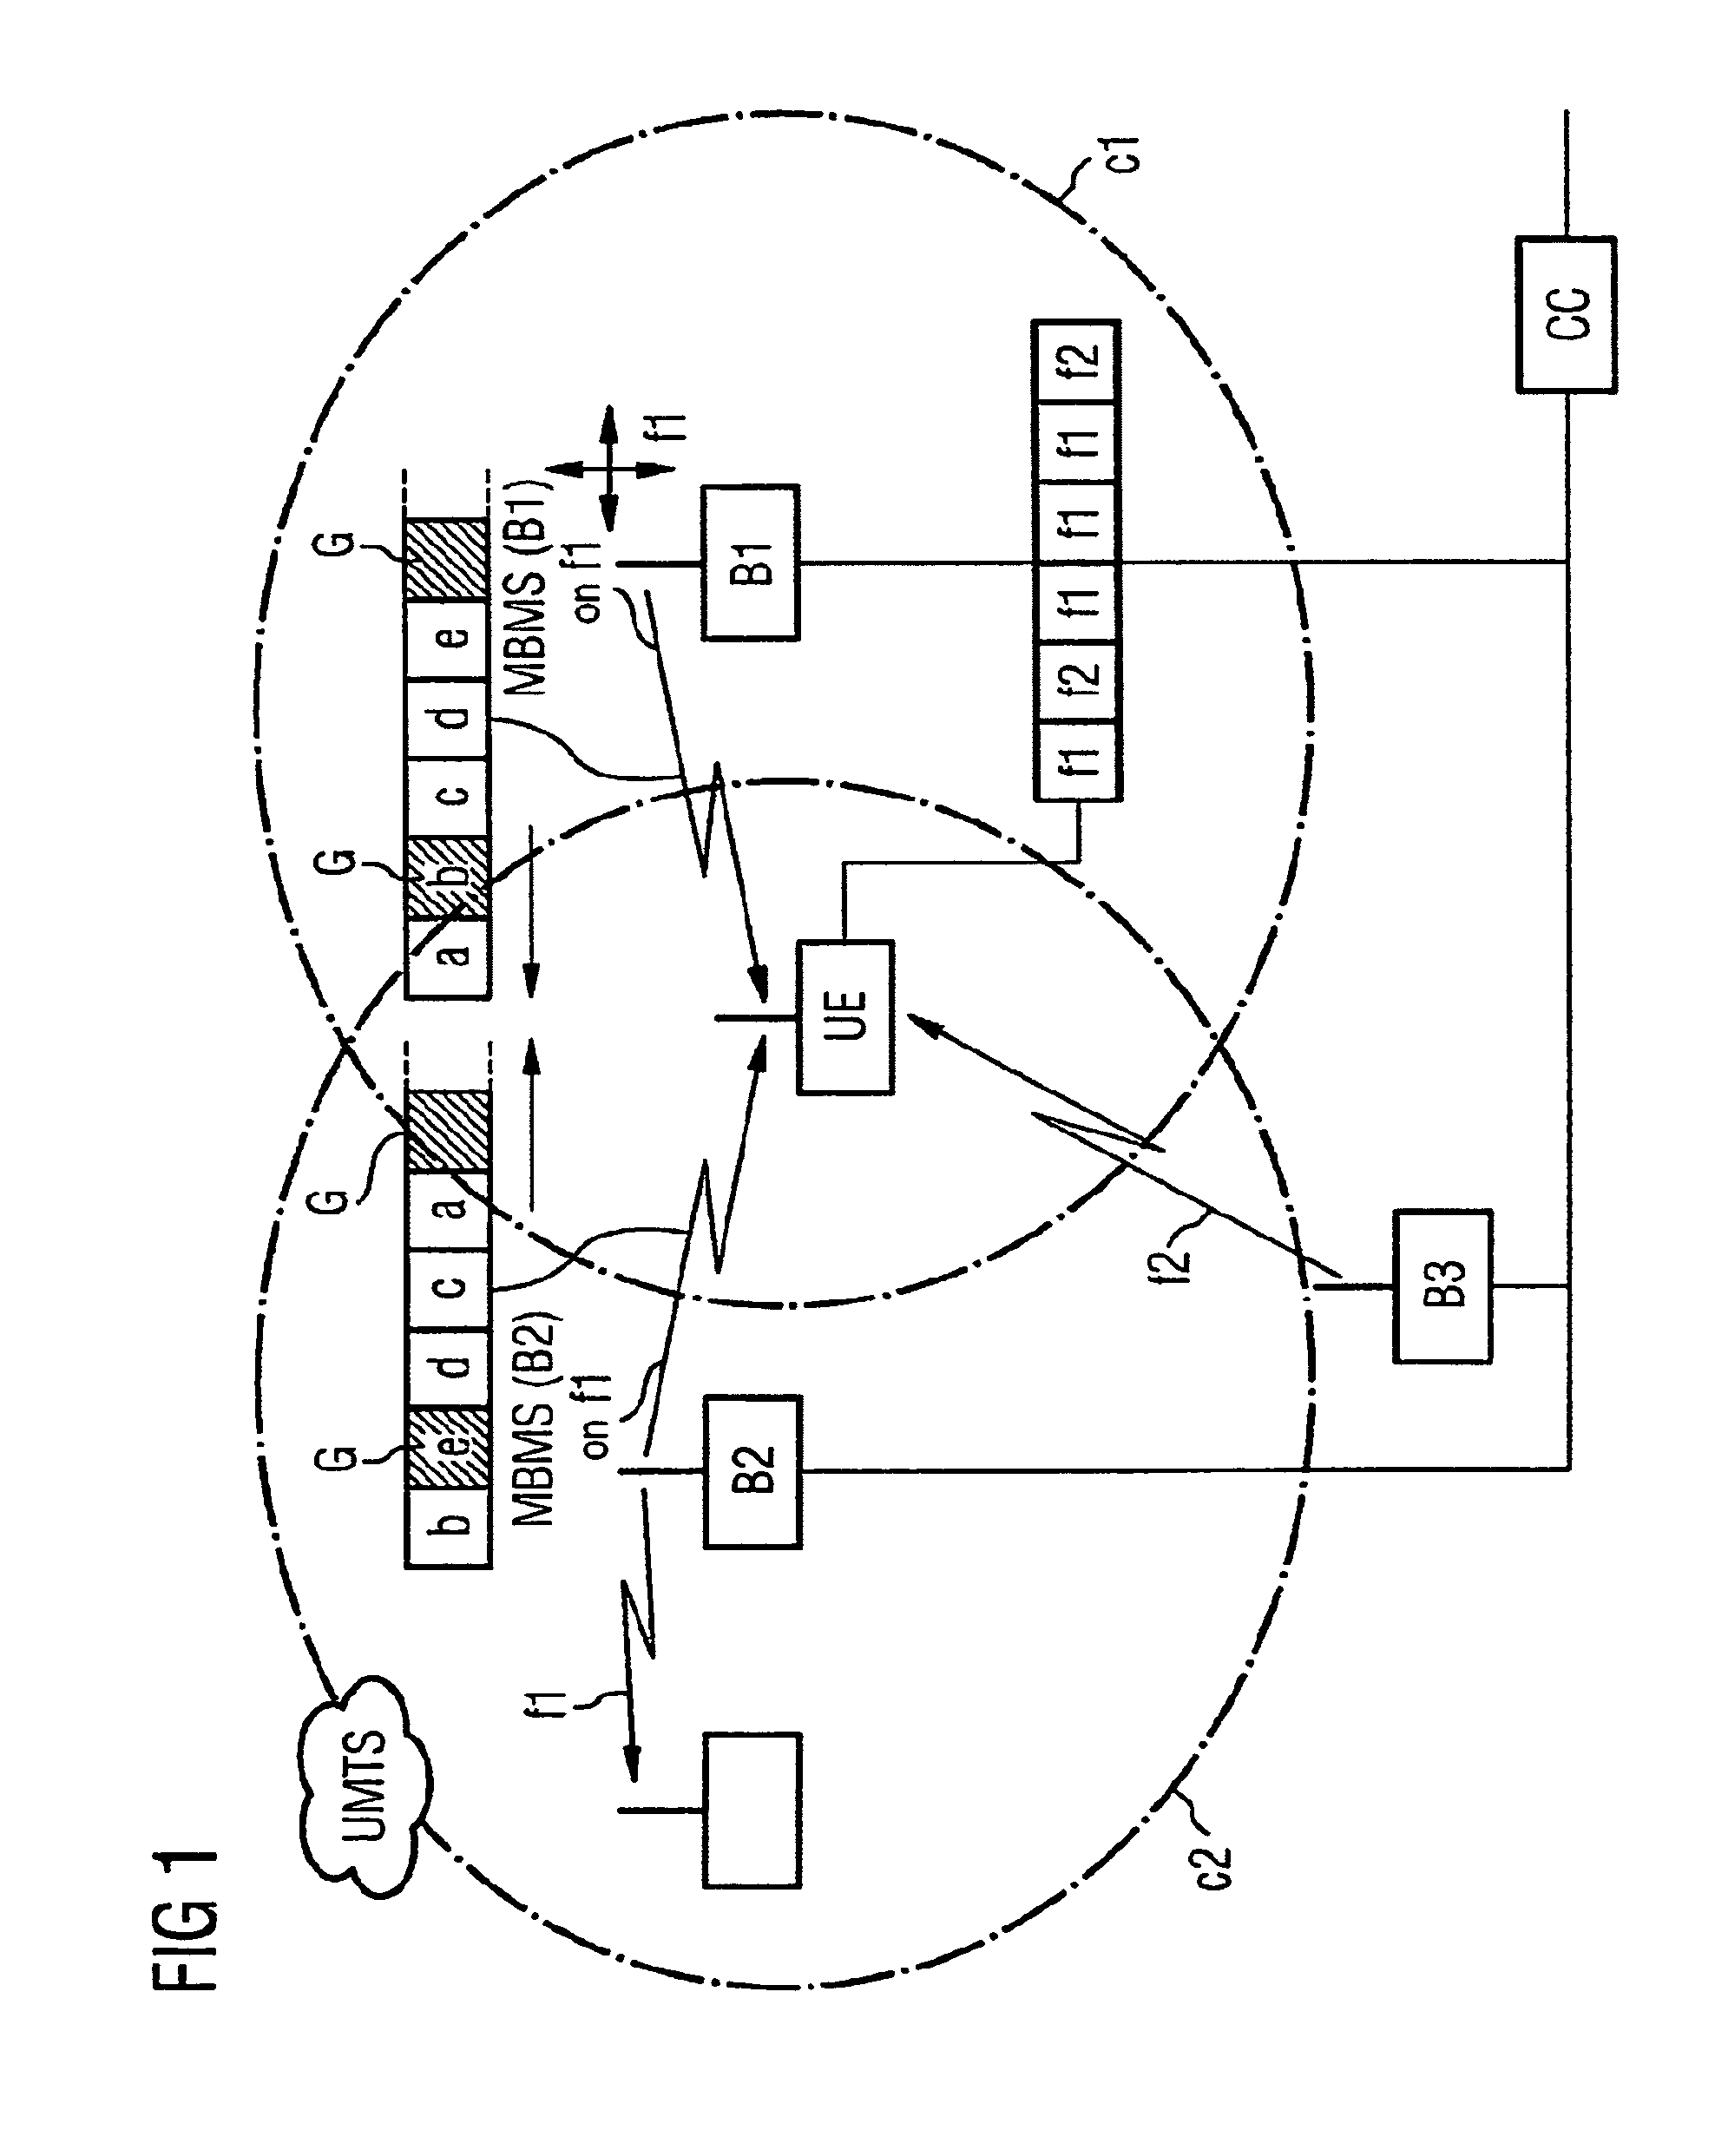 Method for receiving data sent in a sequence in a mobile radio system with reception gaps